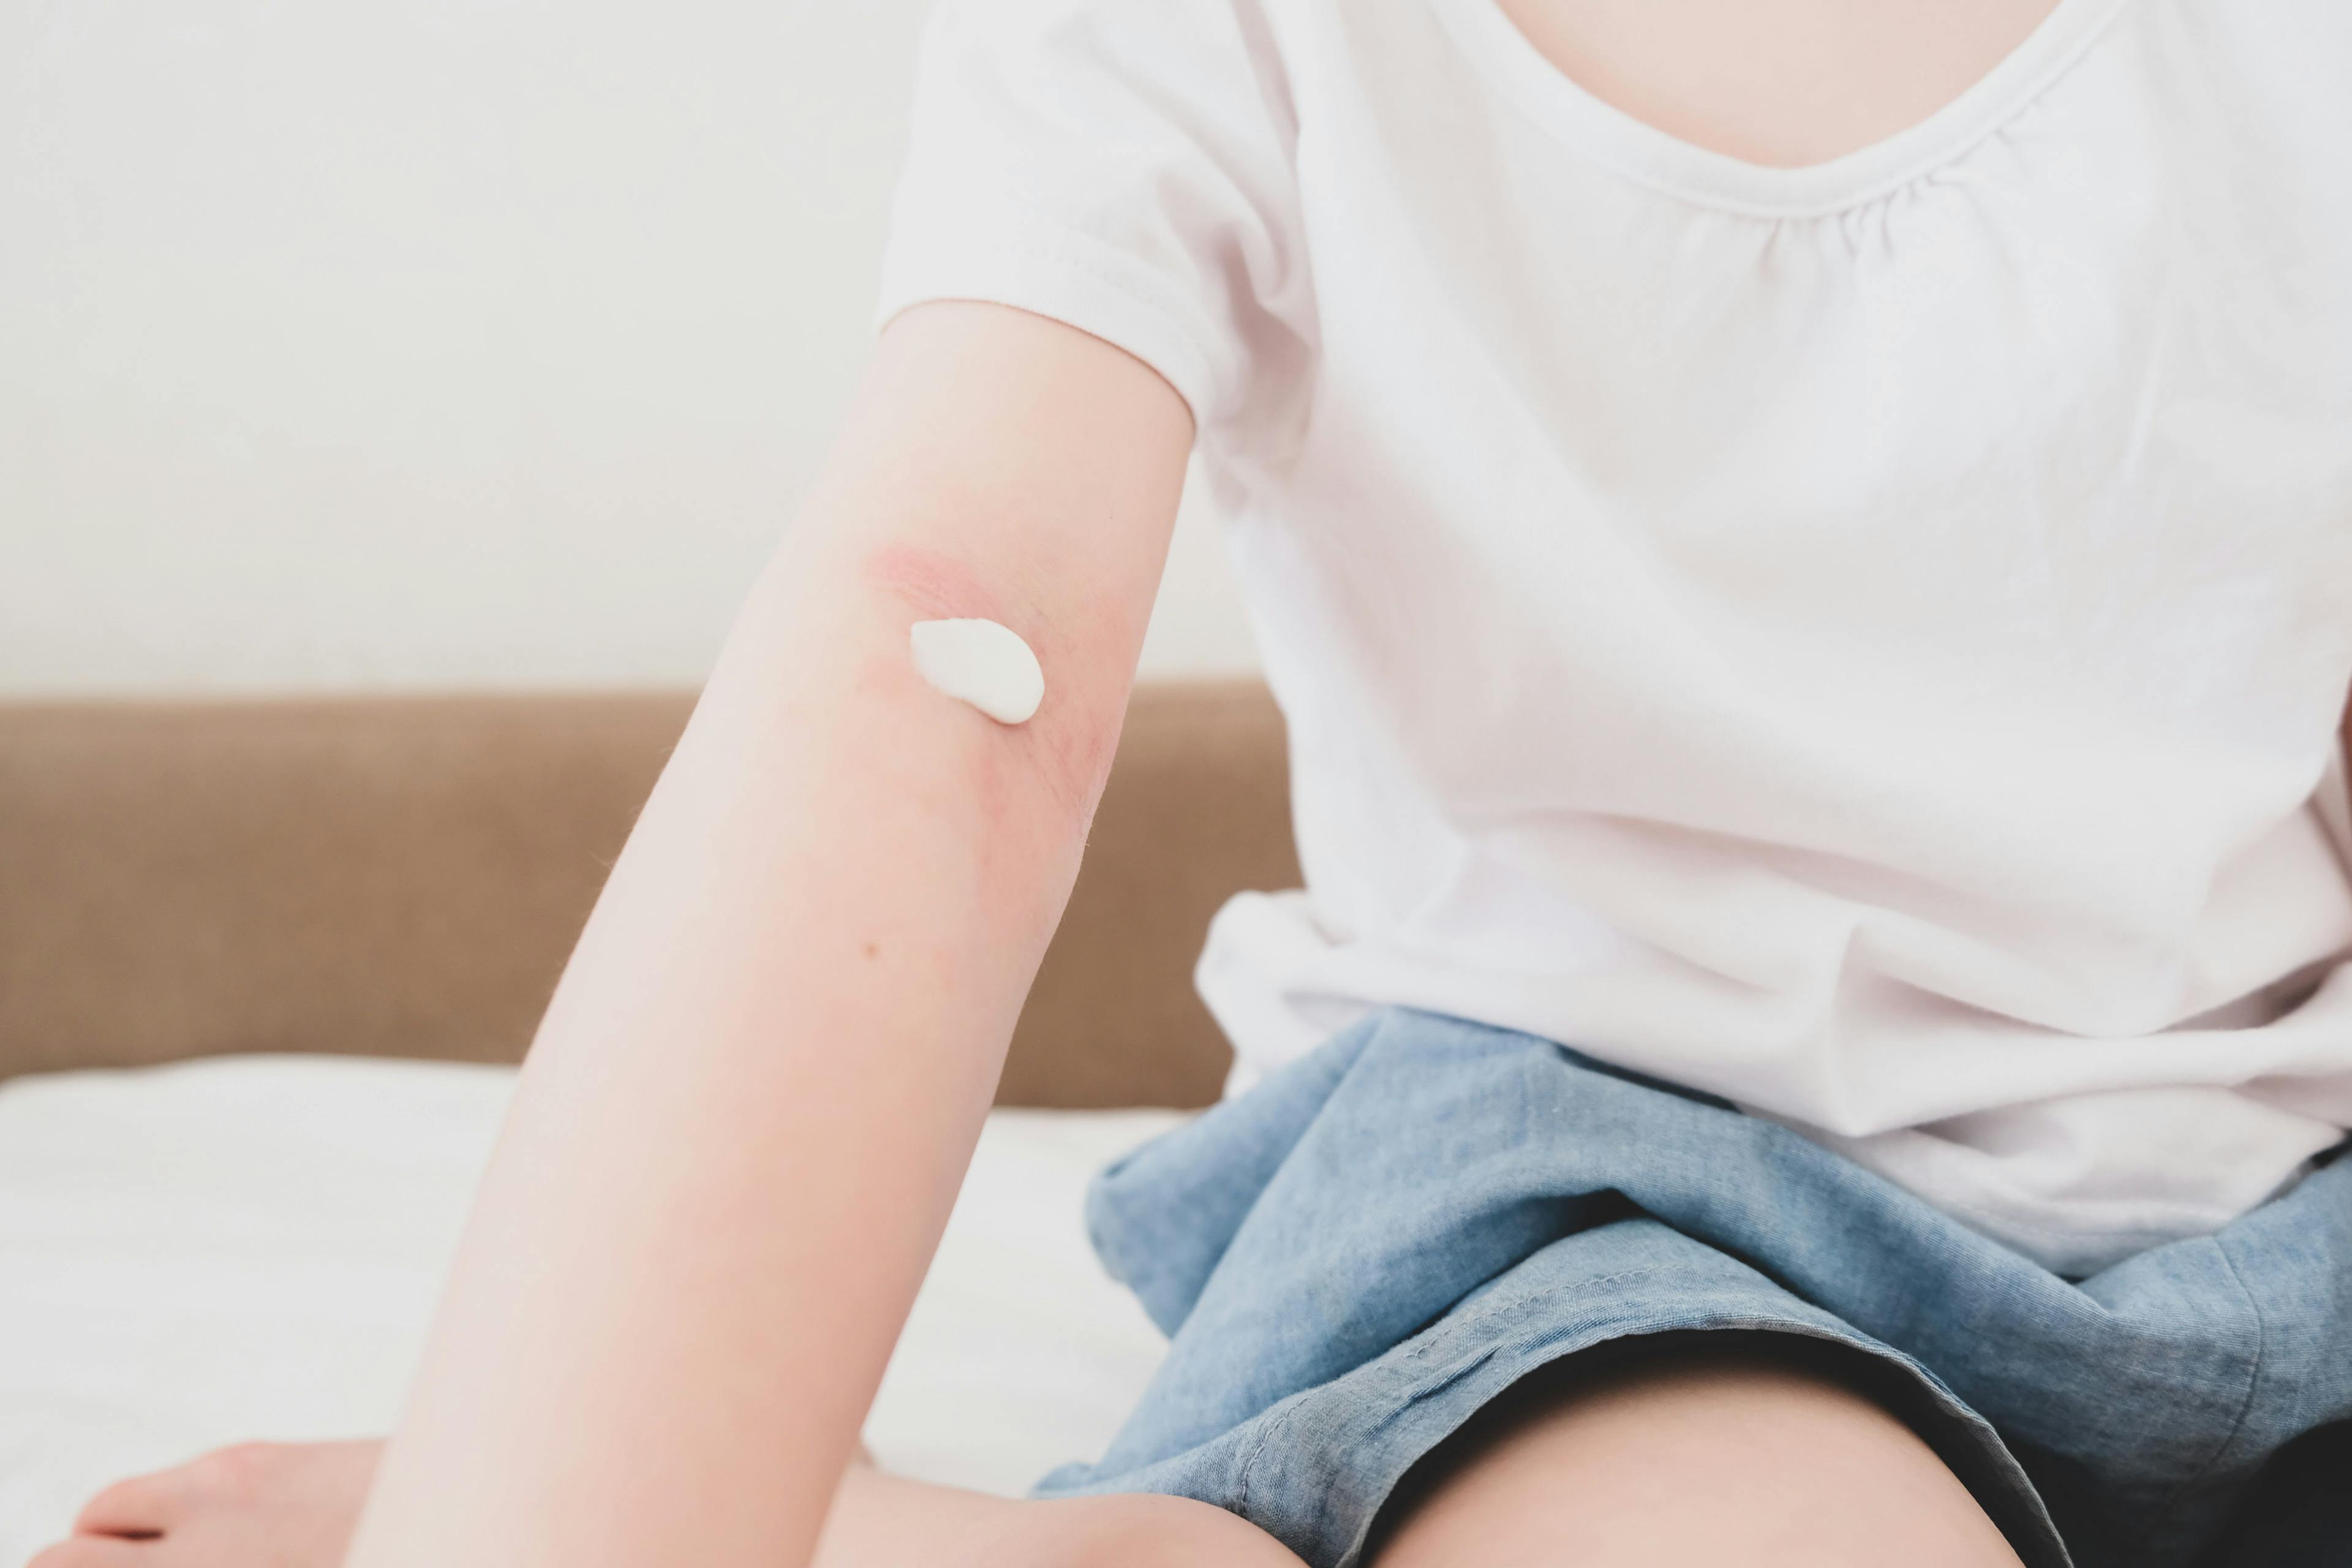 Available Atopic Dermatitis Therapies for Pediatric Patients